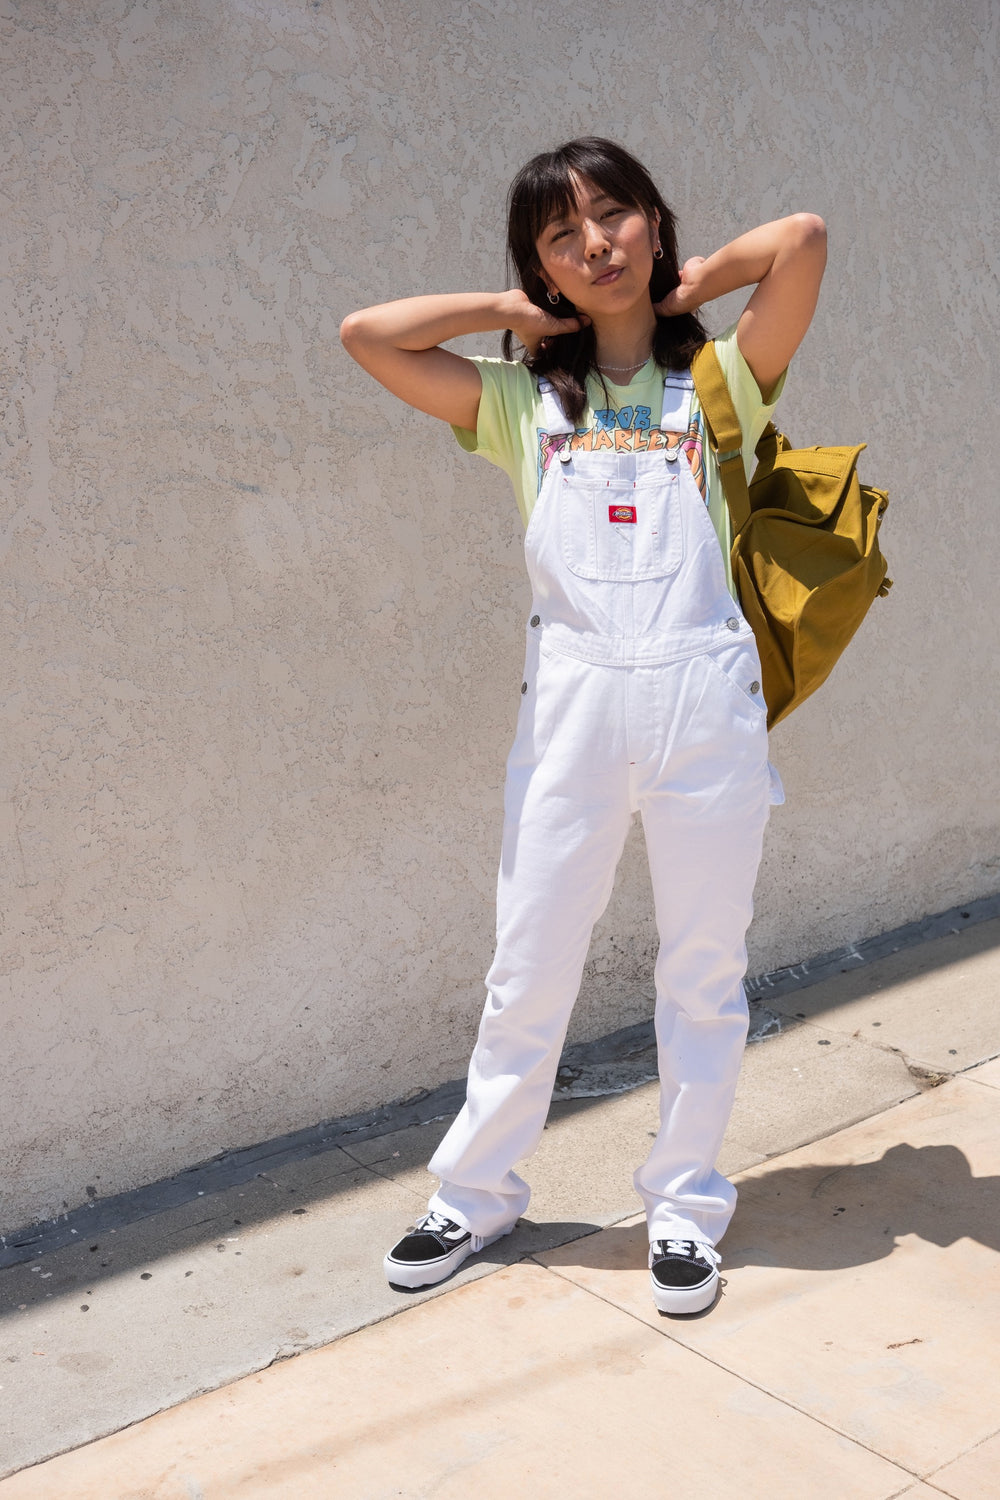 Relaxed Overalls - White